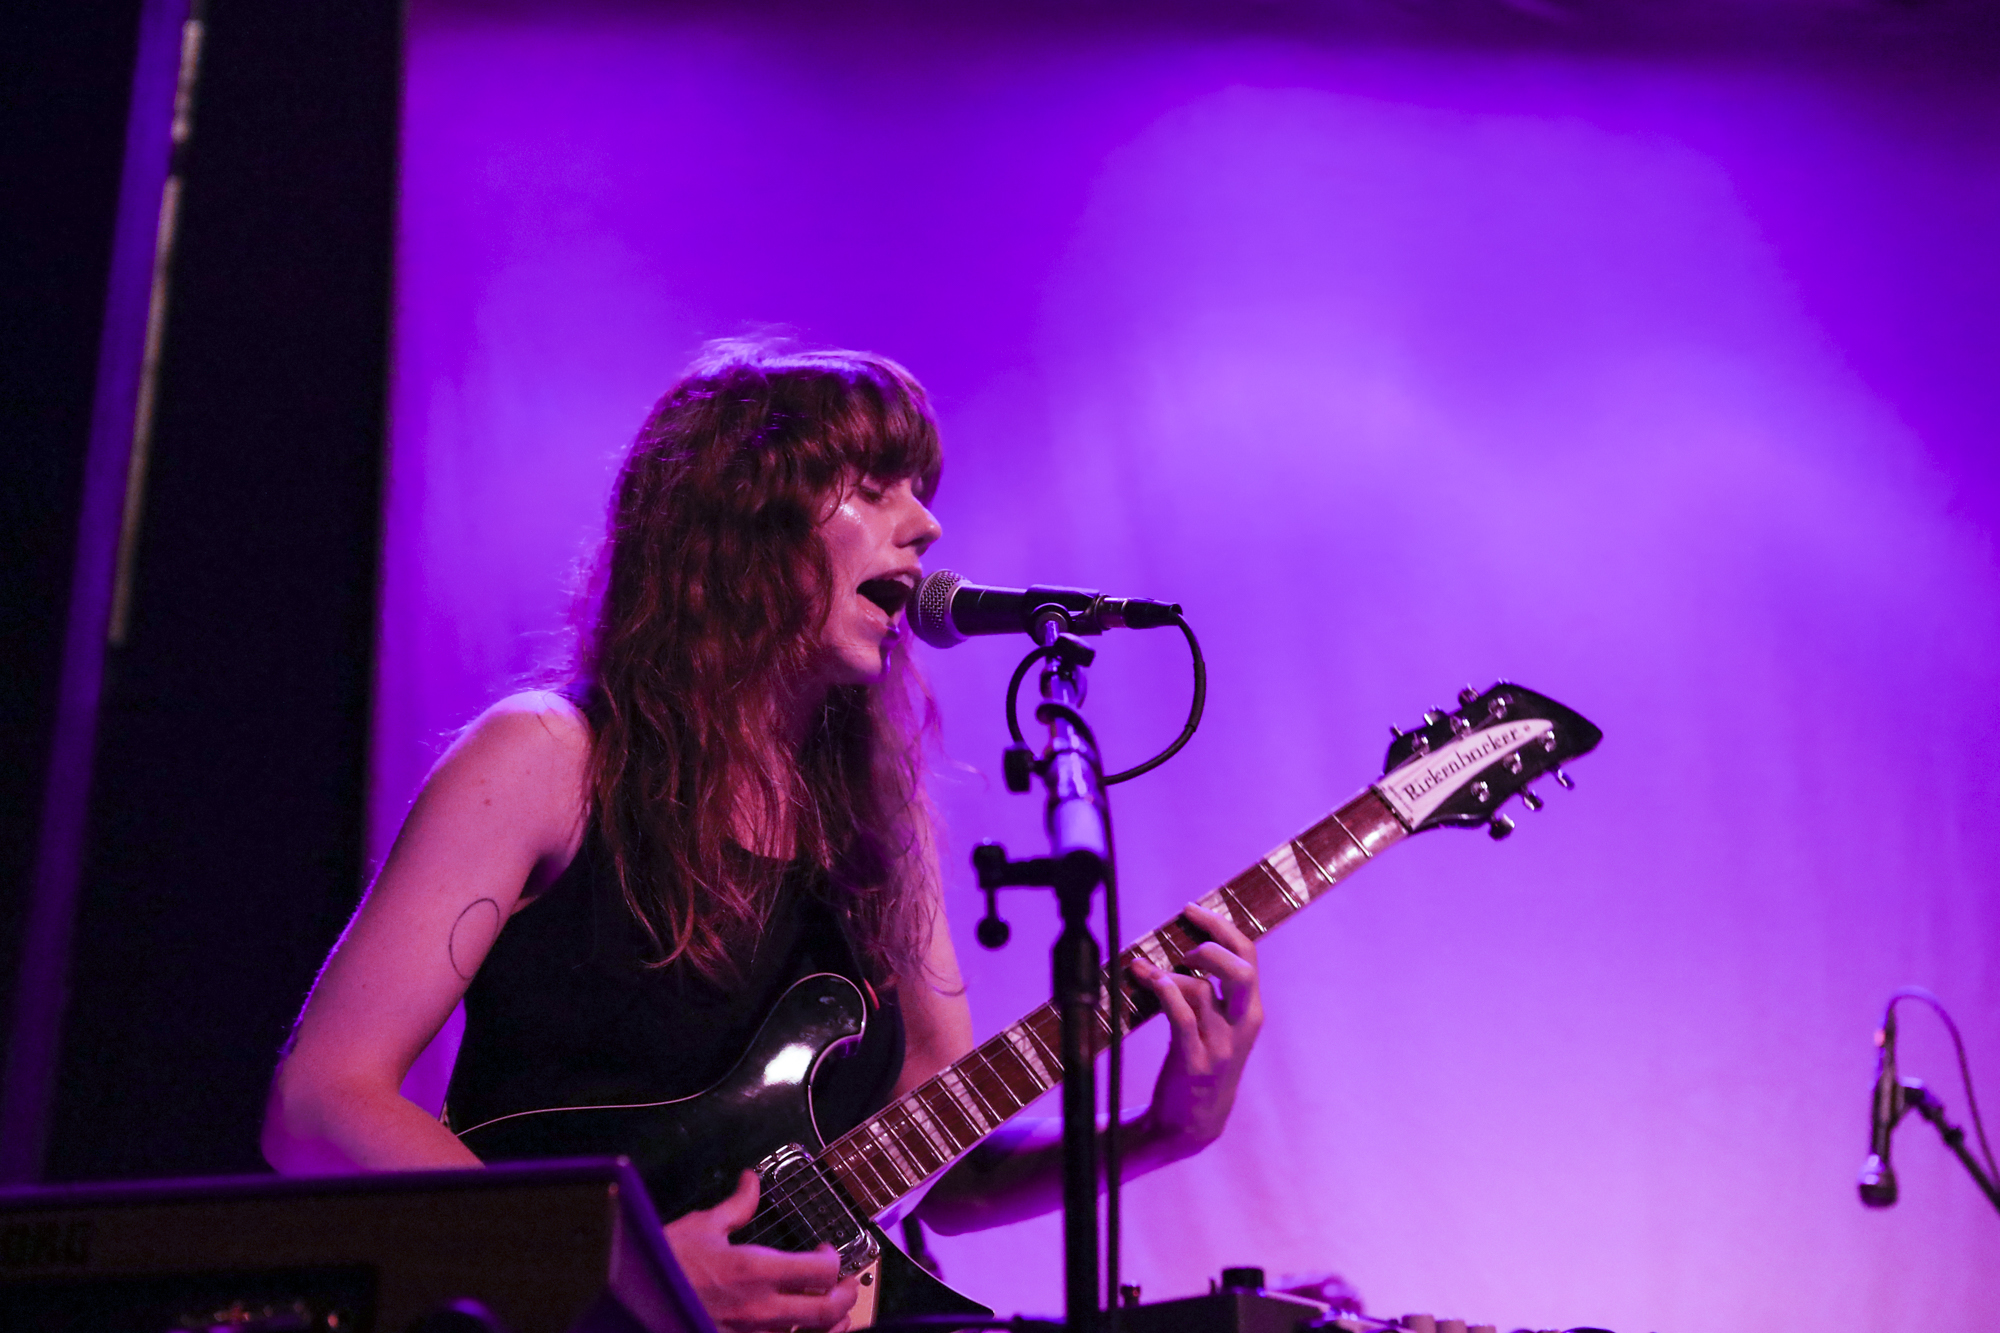 Katie Von Schleicher plays during Northside Festival at Rough Trade in Williamsburg, Brooklyn, New York on June 8, 2018. (© Michael Katzif - Do not use or republish without prior consent.)